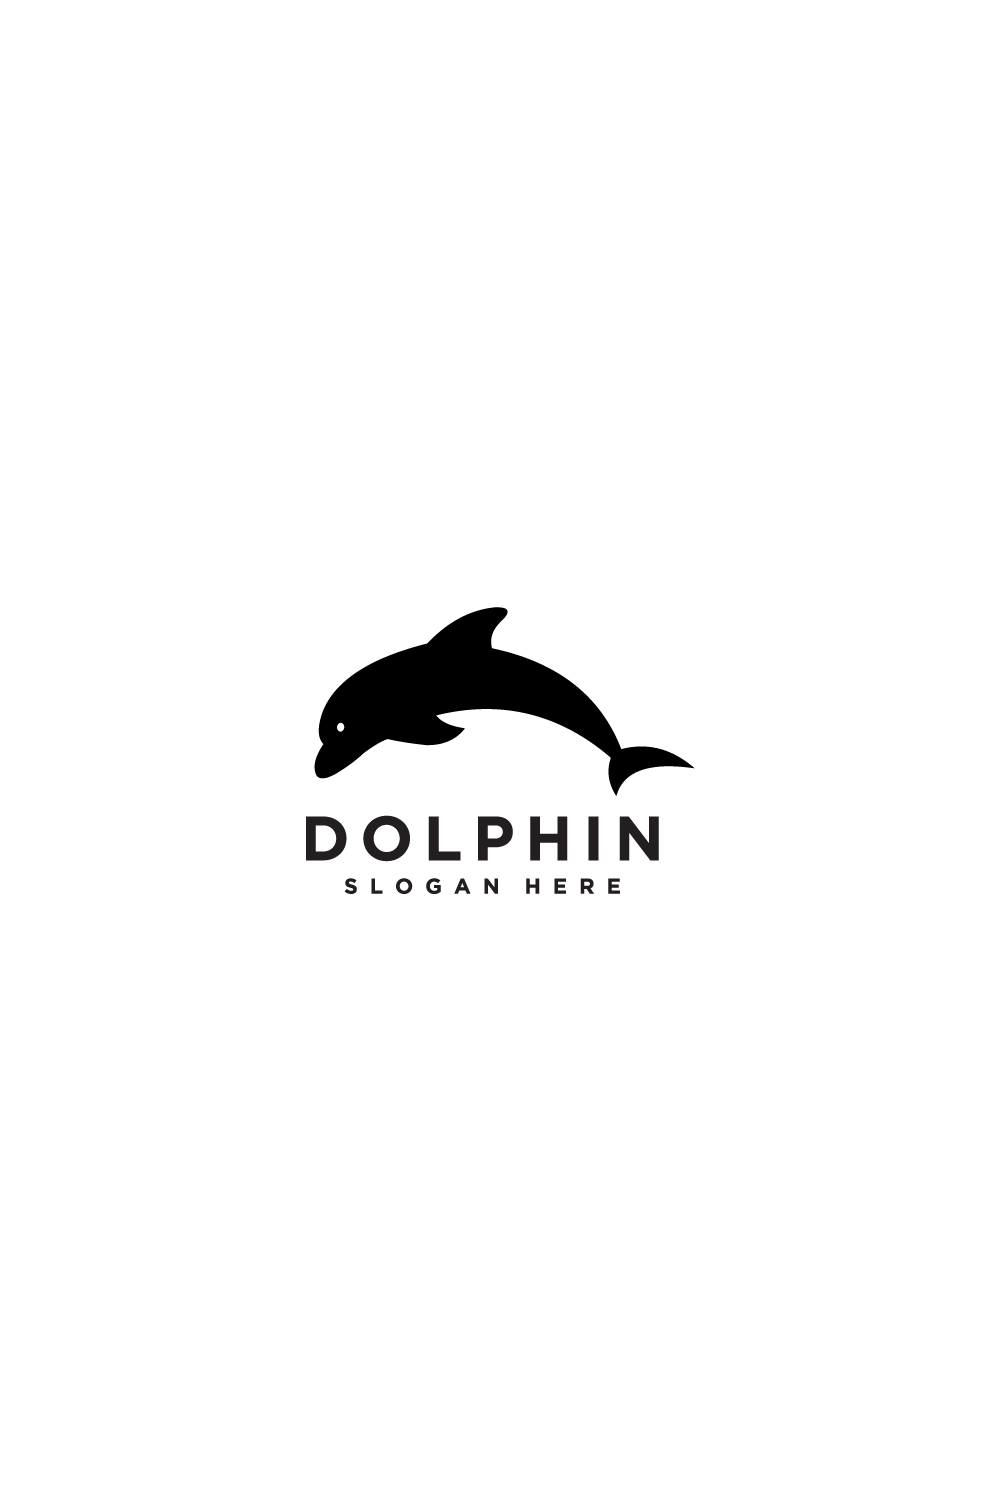 dolphin logo pinterest preview image.